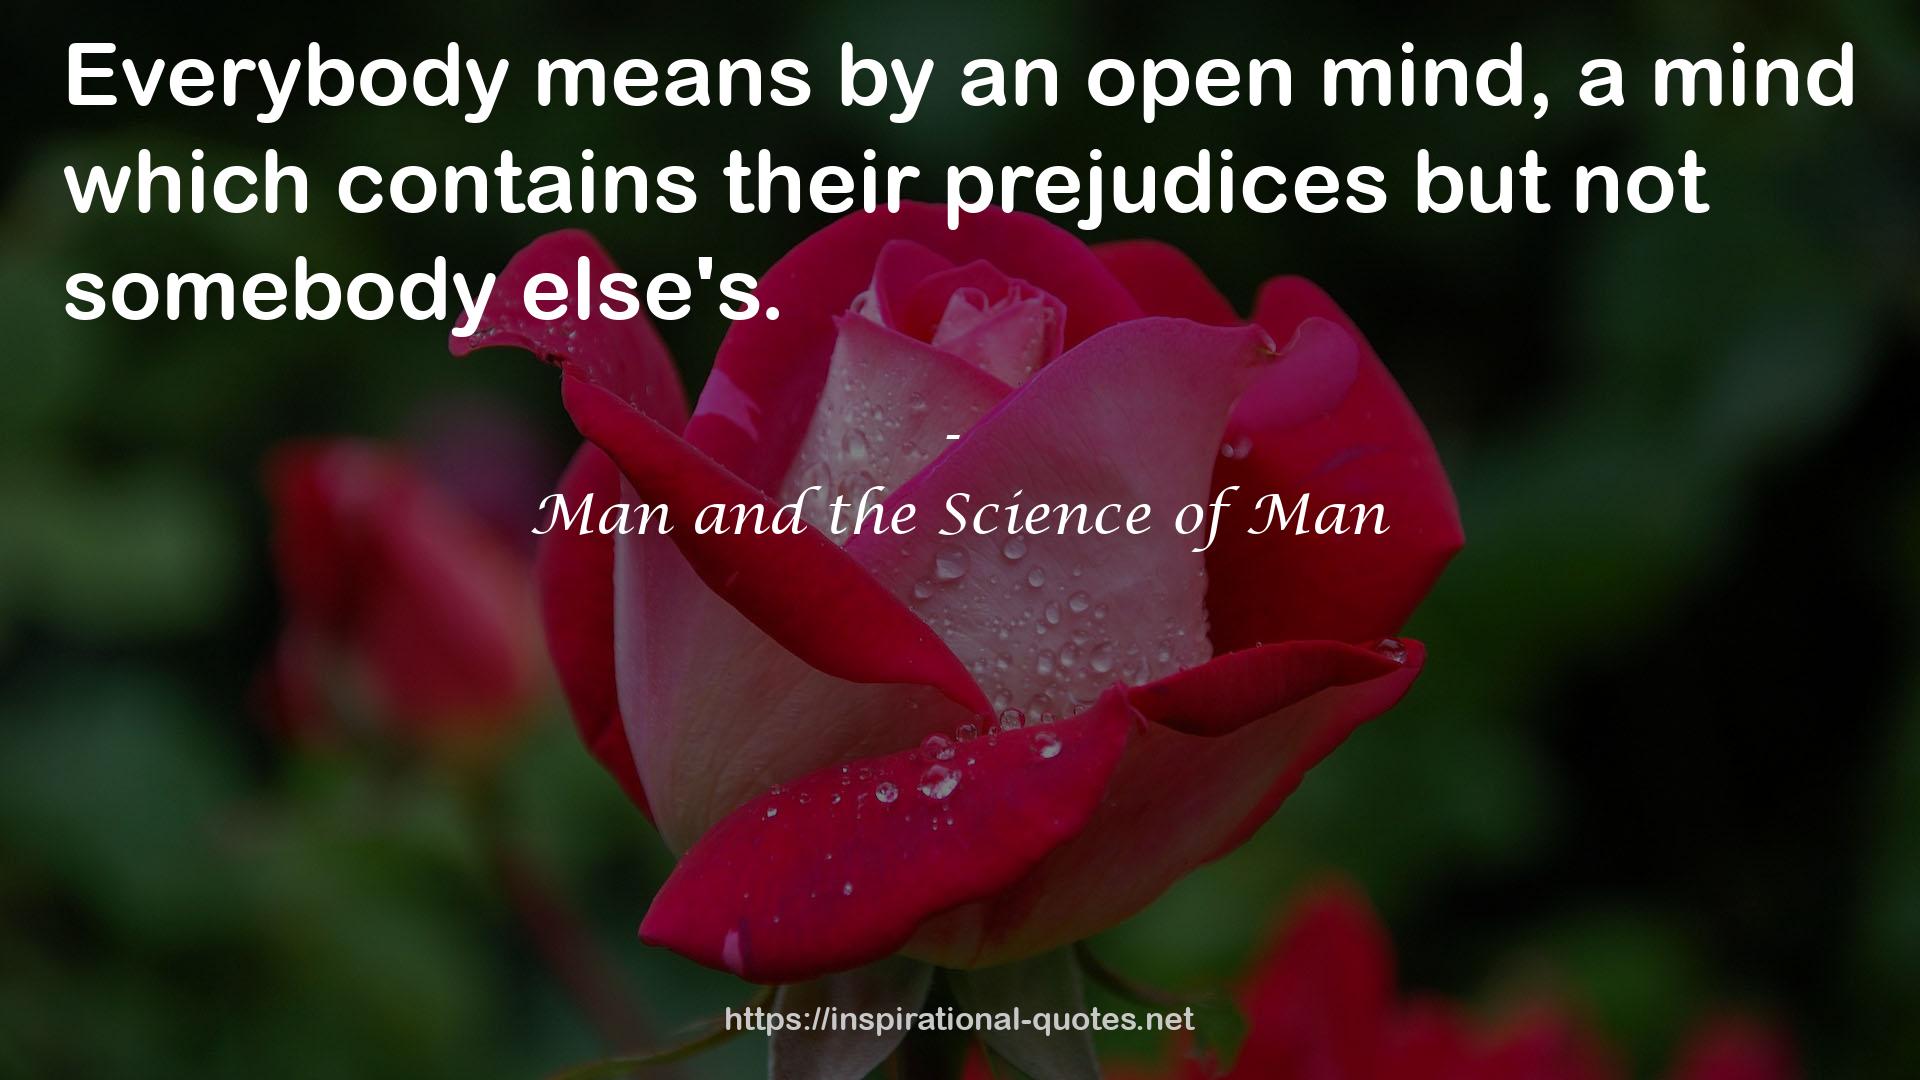 Man and the Science of Man QUOTES